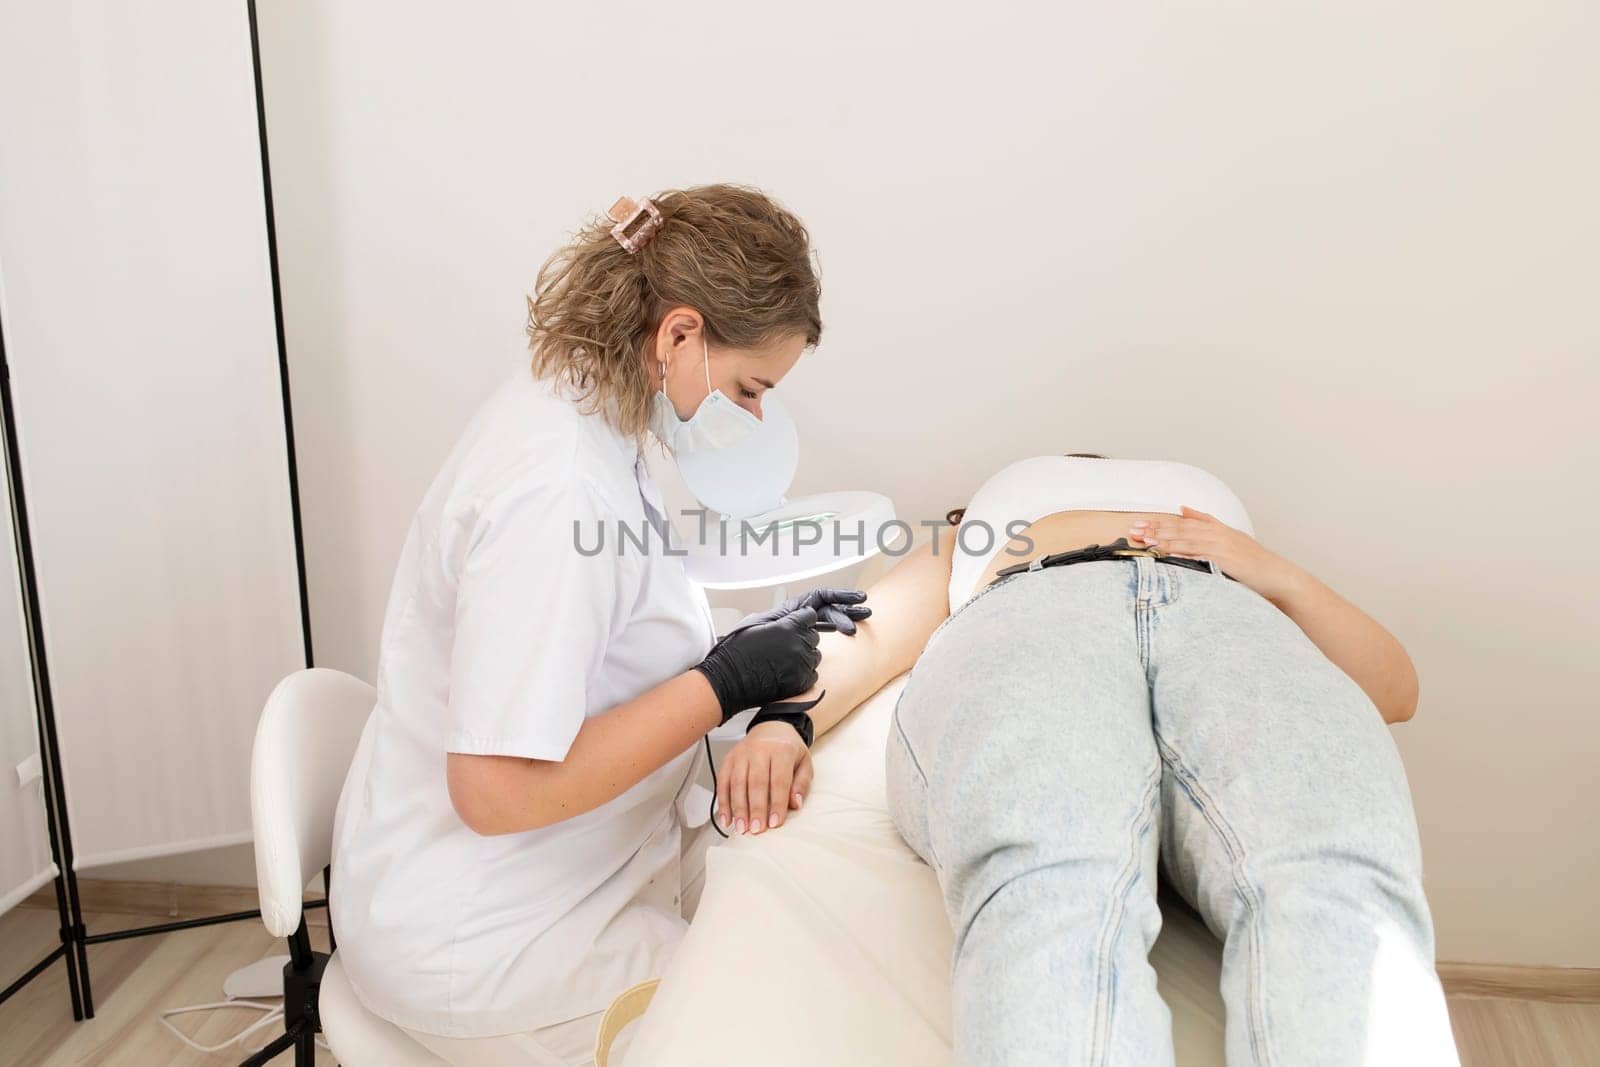 Female Specialist Doing Hair Removal Procedure With Electrolysis On Hand Of White Young Client, Electroepilation In Beauty Salon. Horizontal Plane. Authentic High quality photo